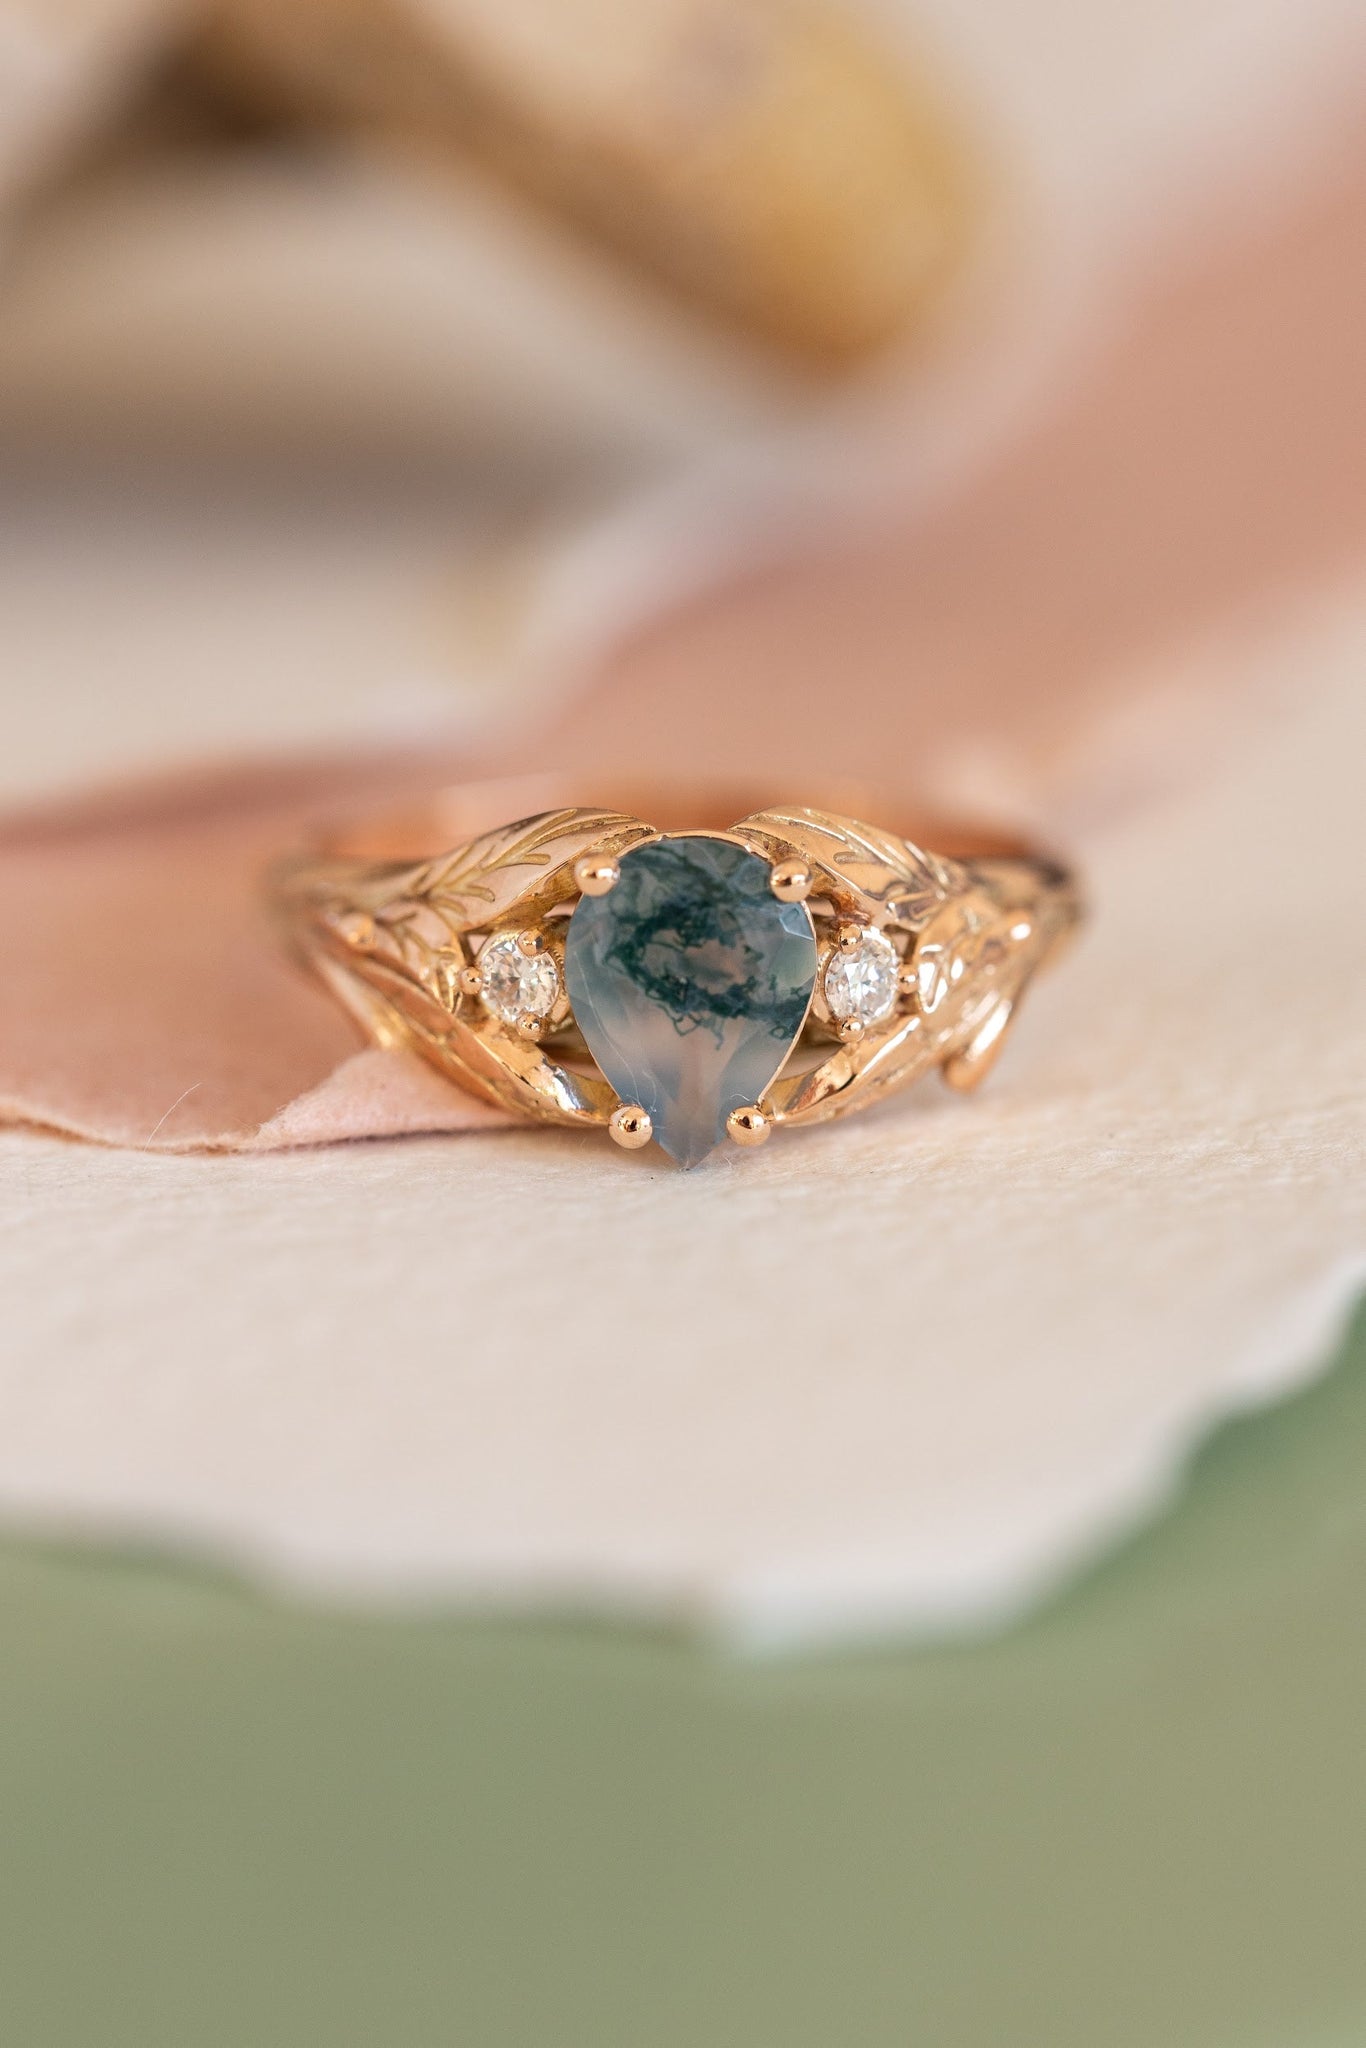 Unique moss agate engagement ring, rose gold engagement ring with accent diamonds / Wisteria - Eden Garden Jewelry™